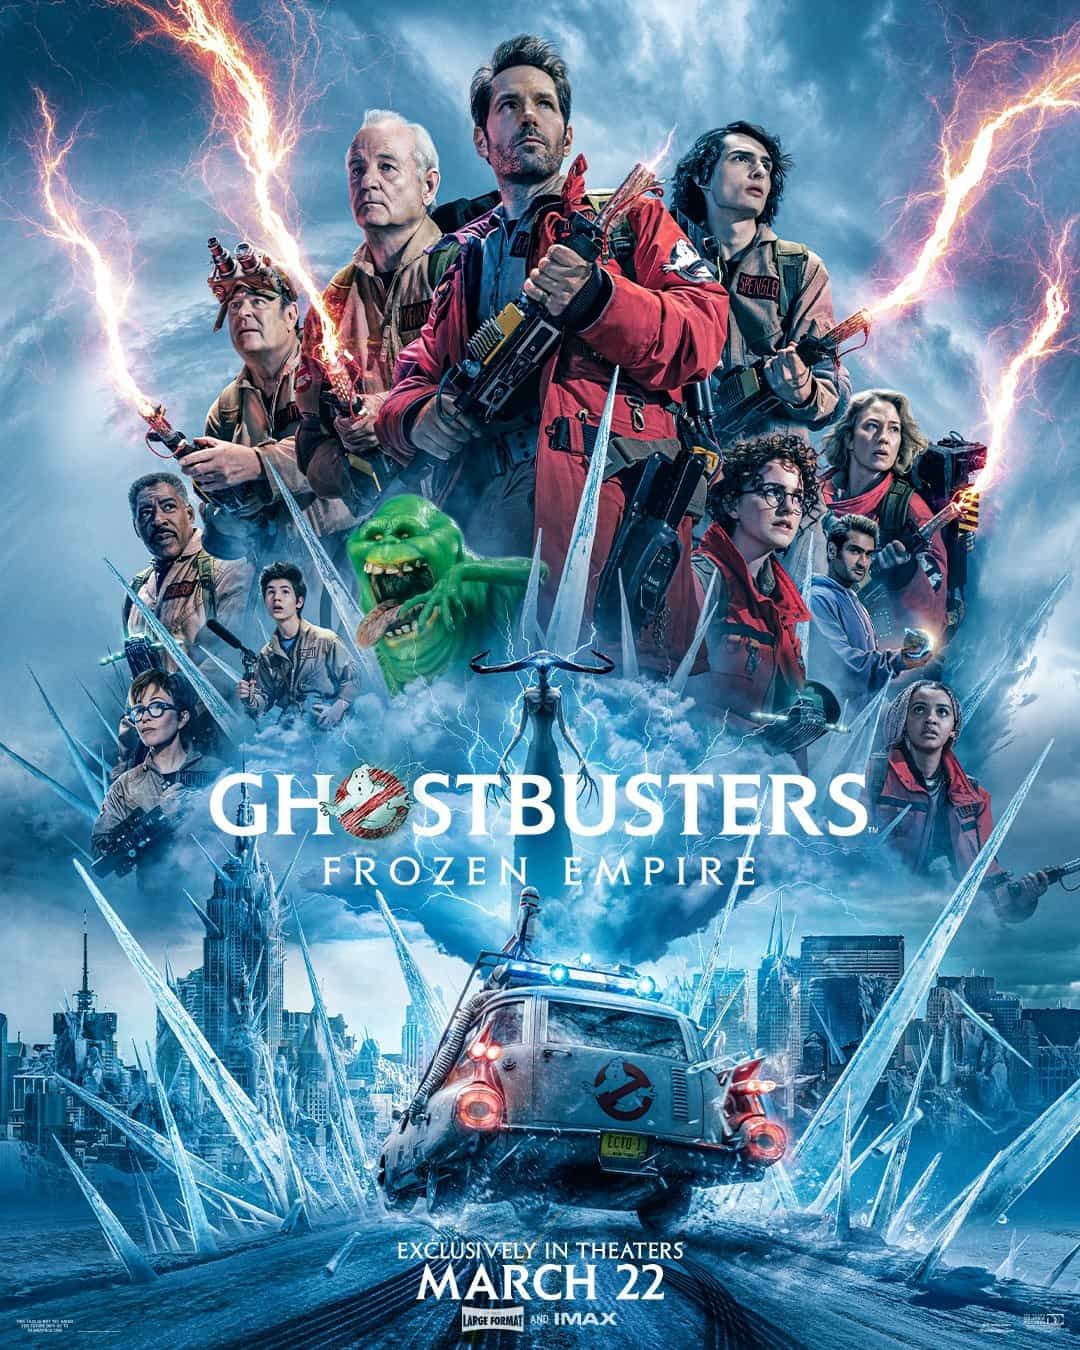 Ghostbusters: Frozen Empire has been given a 12A age rating in the UK for moderate threat, horror, sex references, implied strong language